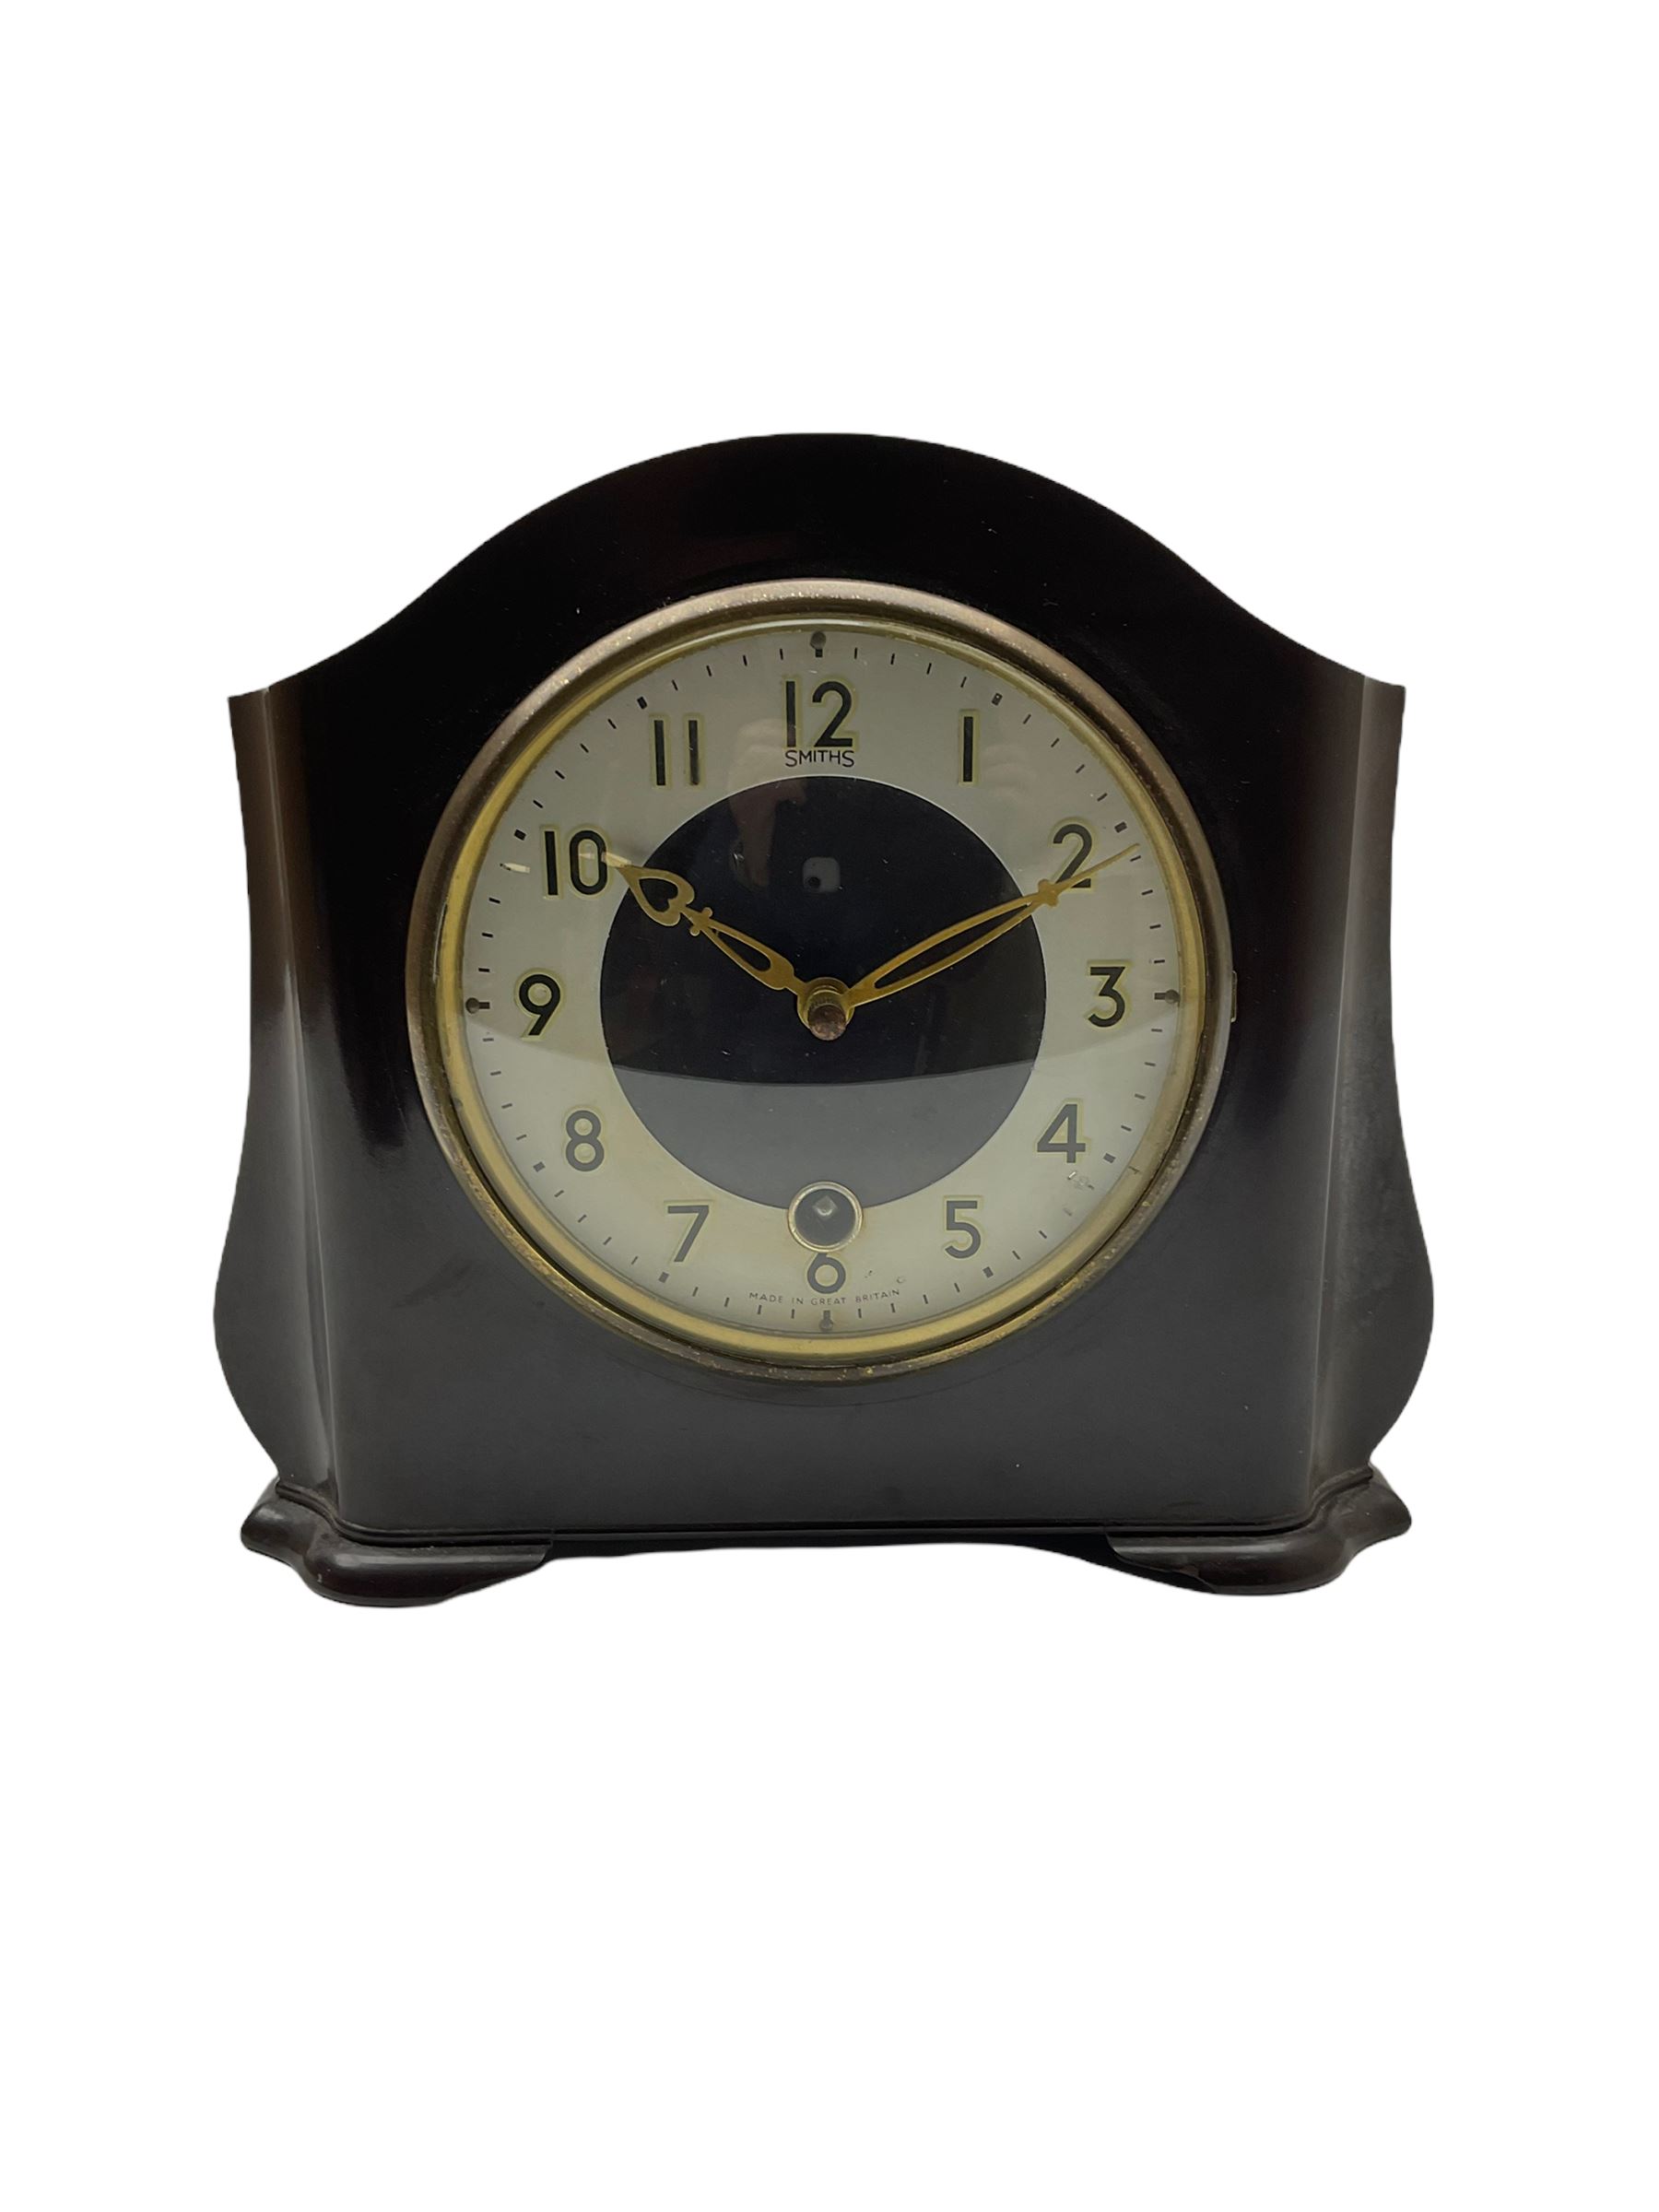 A Retro Art-Deco 1950's Bakelite cased mantel clock with a Smiths timepiece movement housed in a dom